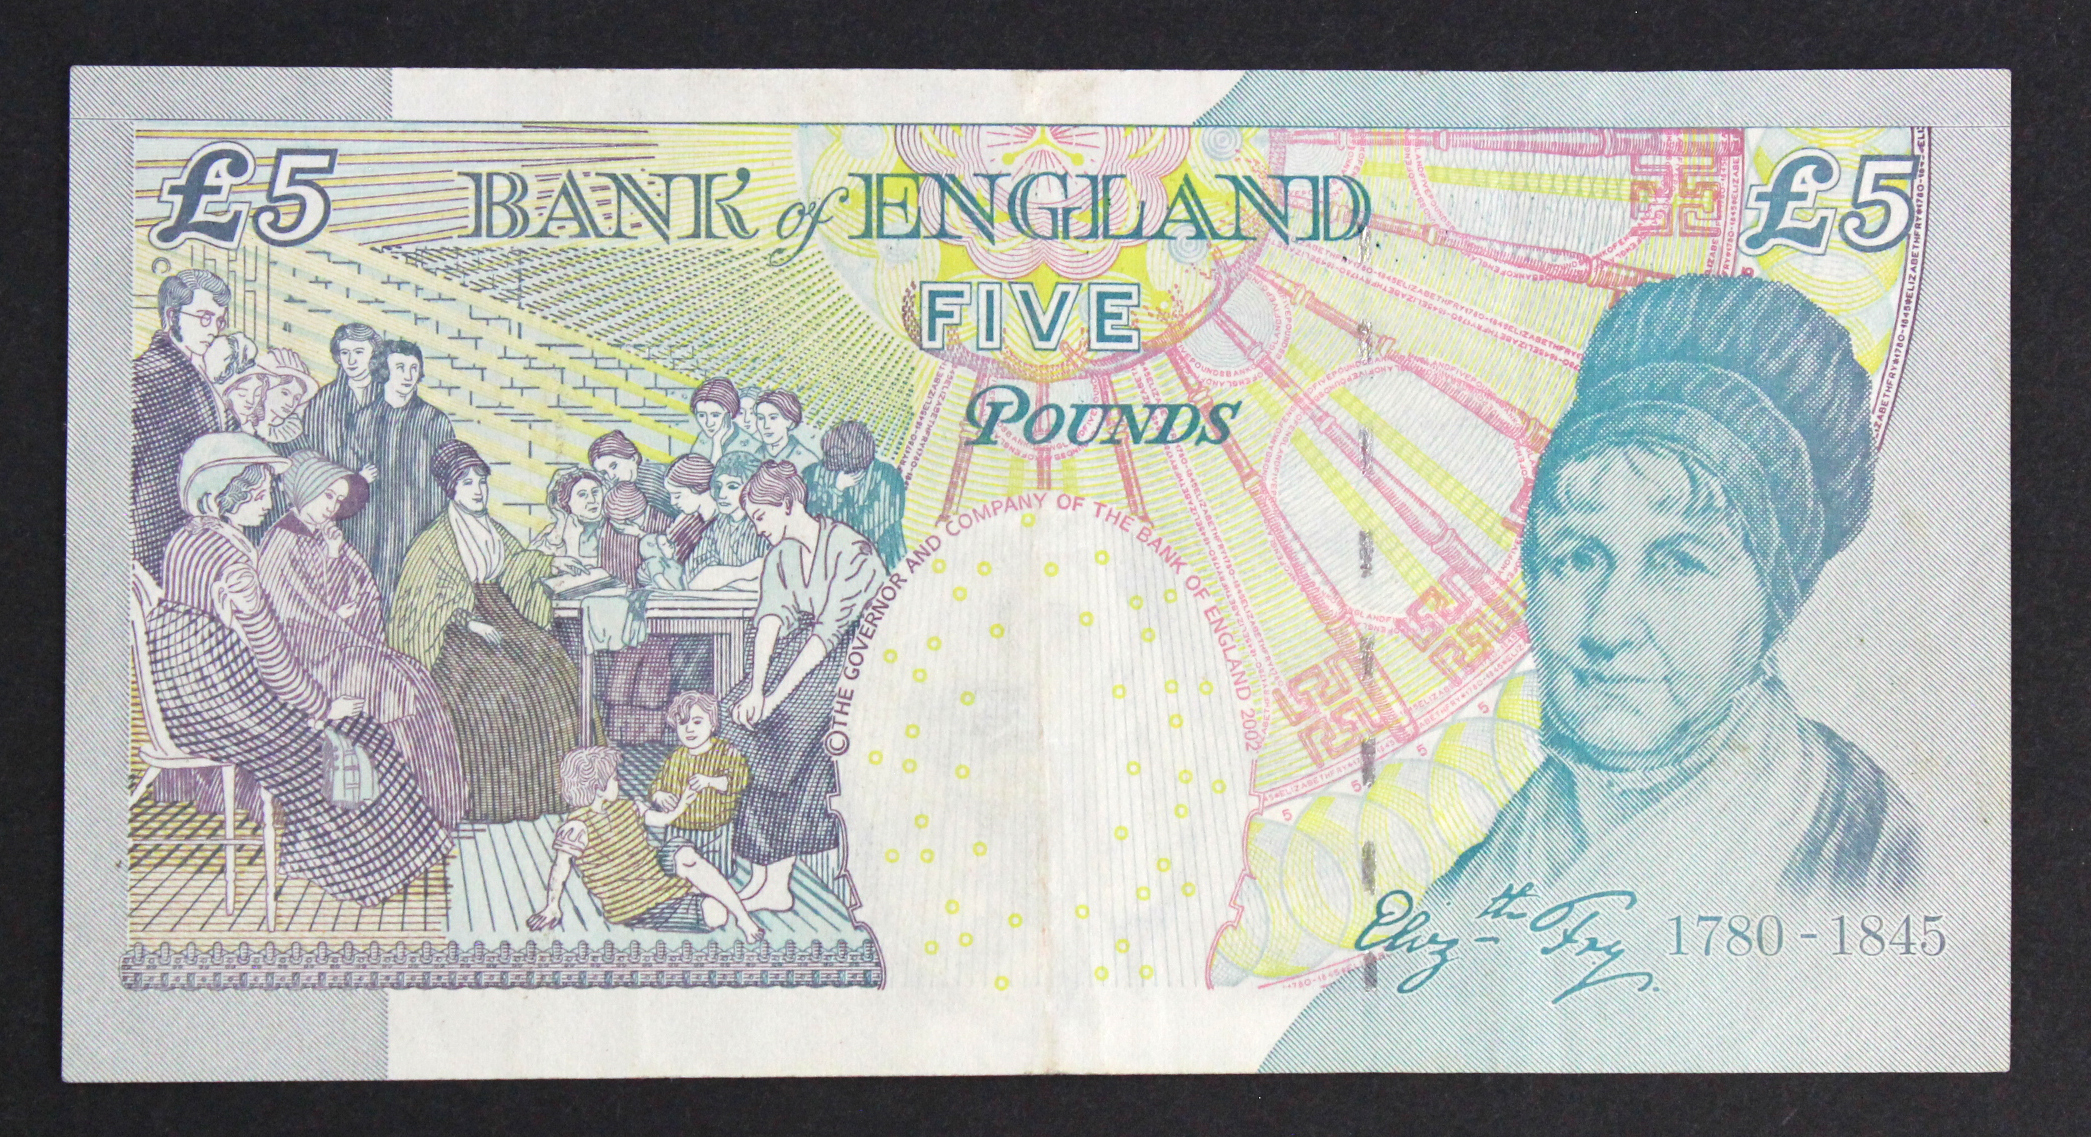 ERROR Lowther 5 Pounds issued 2002, a very unusual HOLOGRAM error, silver foil hologram visible in 2 - Image 2 of 2